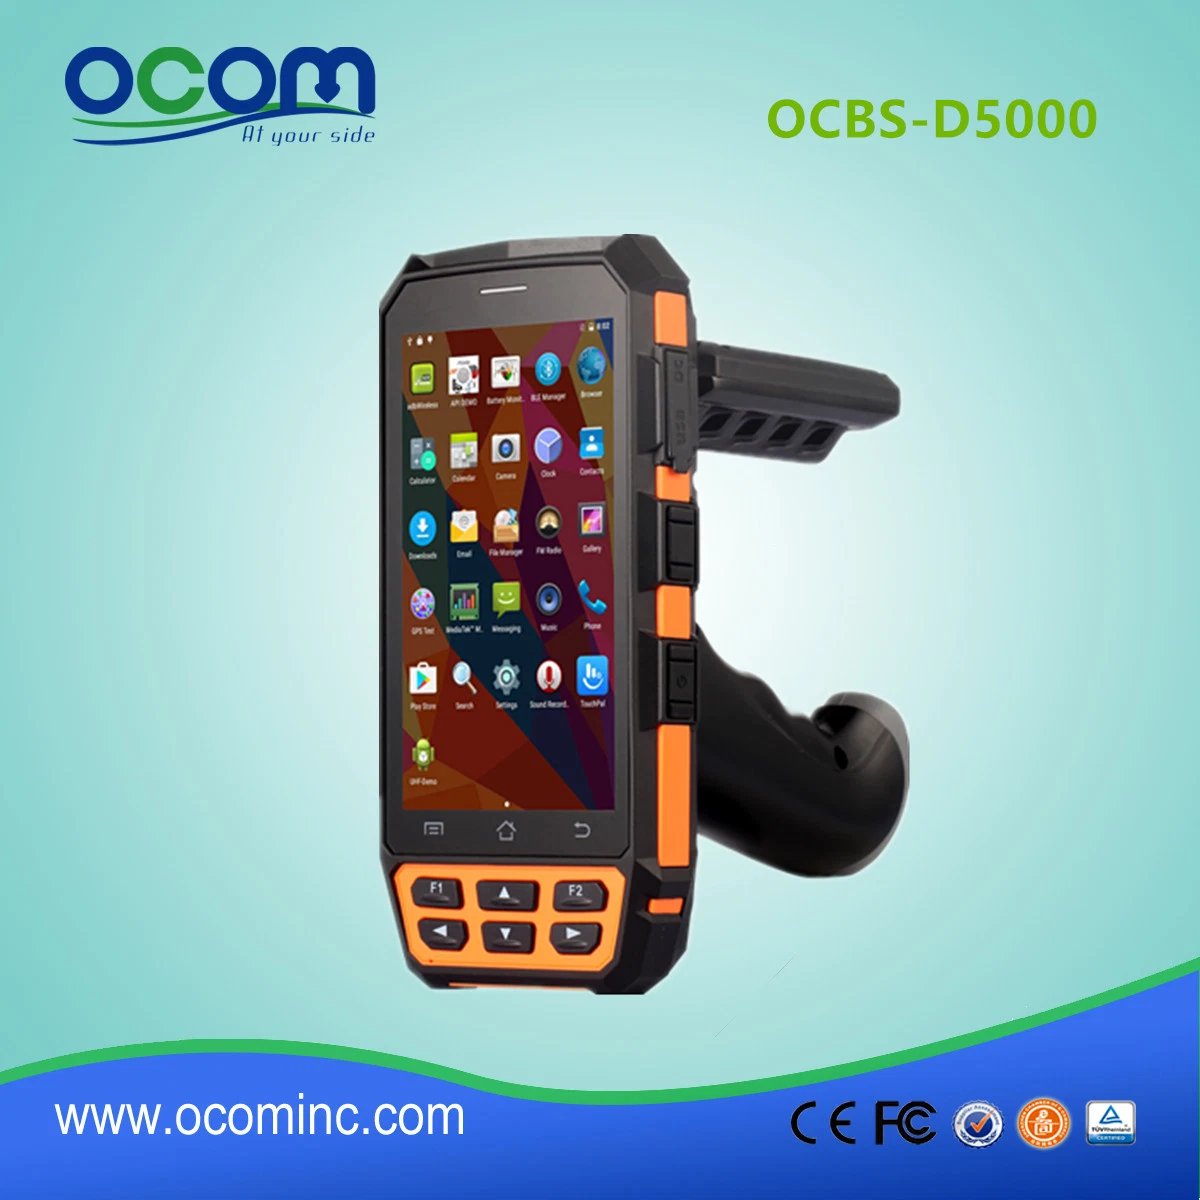 Mobile Barcode Handheld Terminal with RFID Reader